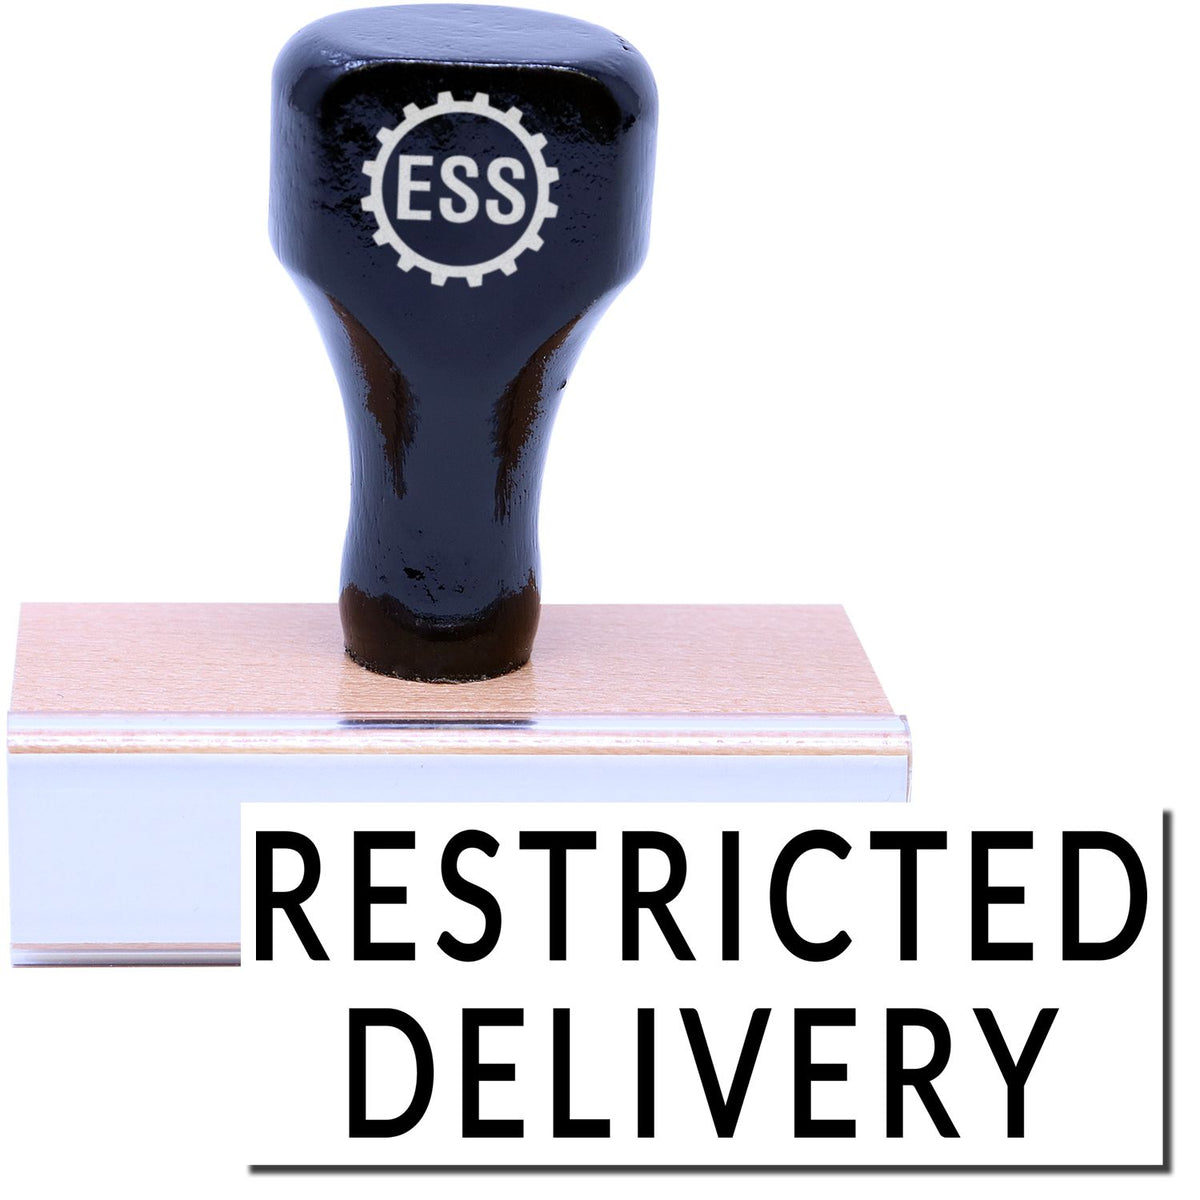 Restricted Delivery Rubber Stamp